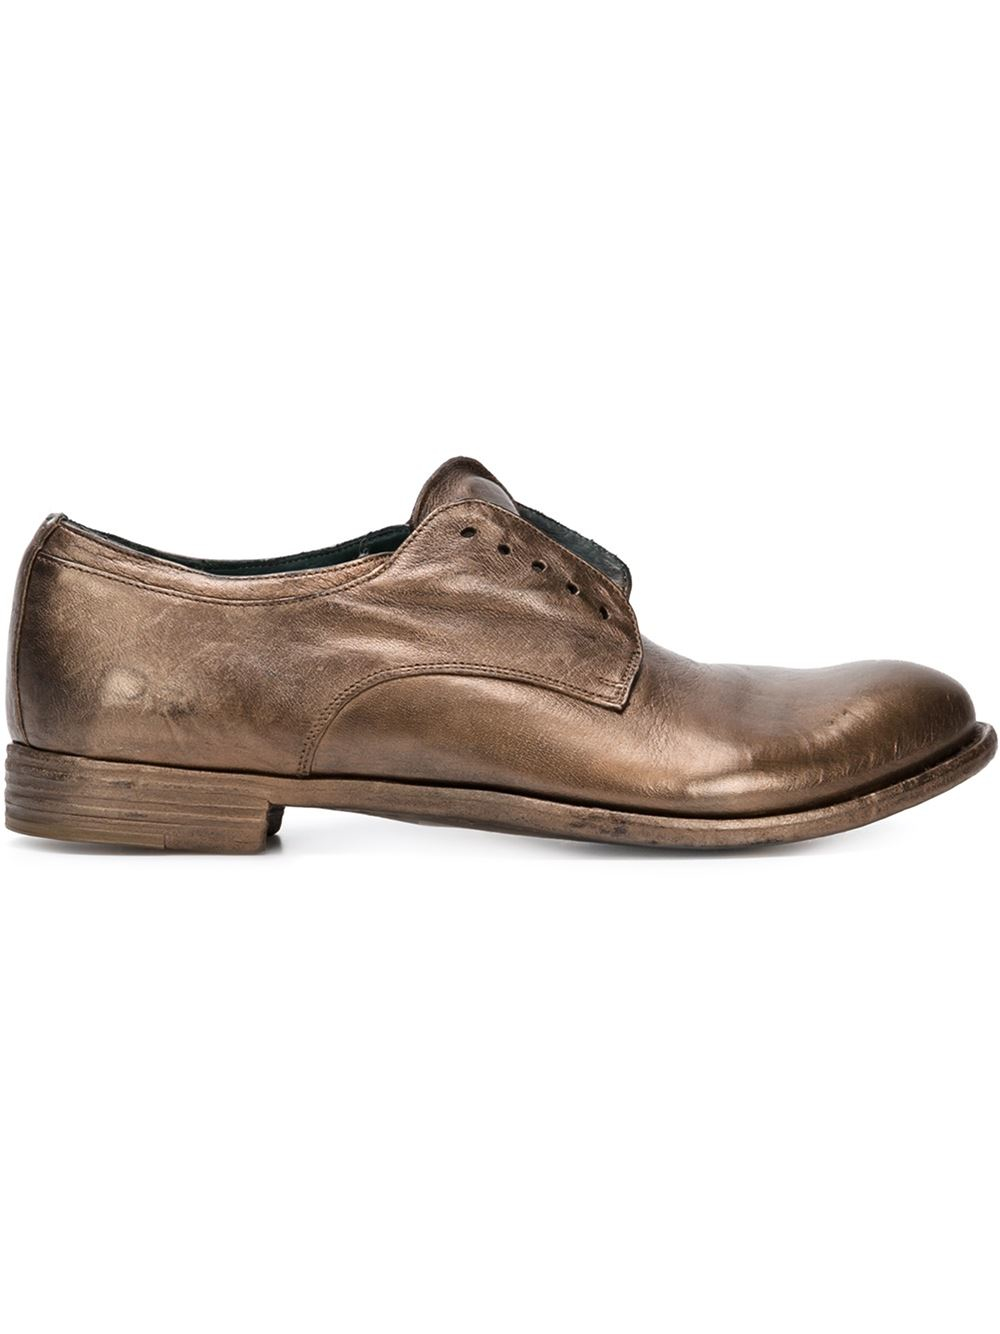 Officine creative 'lexicon' Shoes in Gold (BROWN) - Save 60% | Lyst